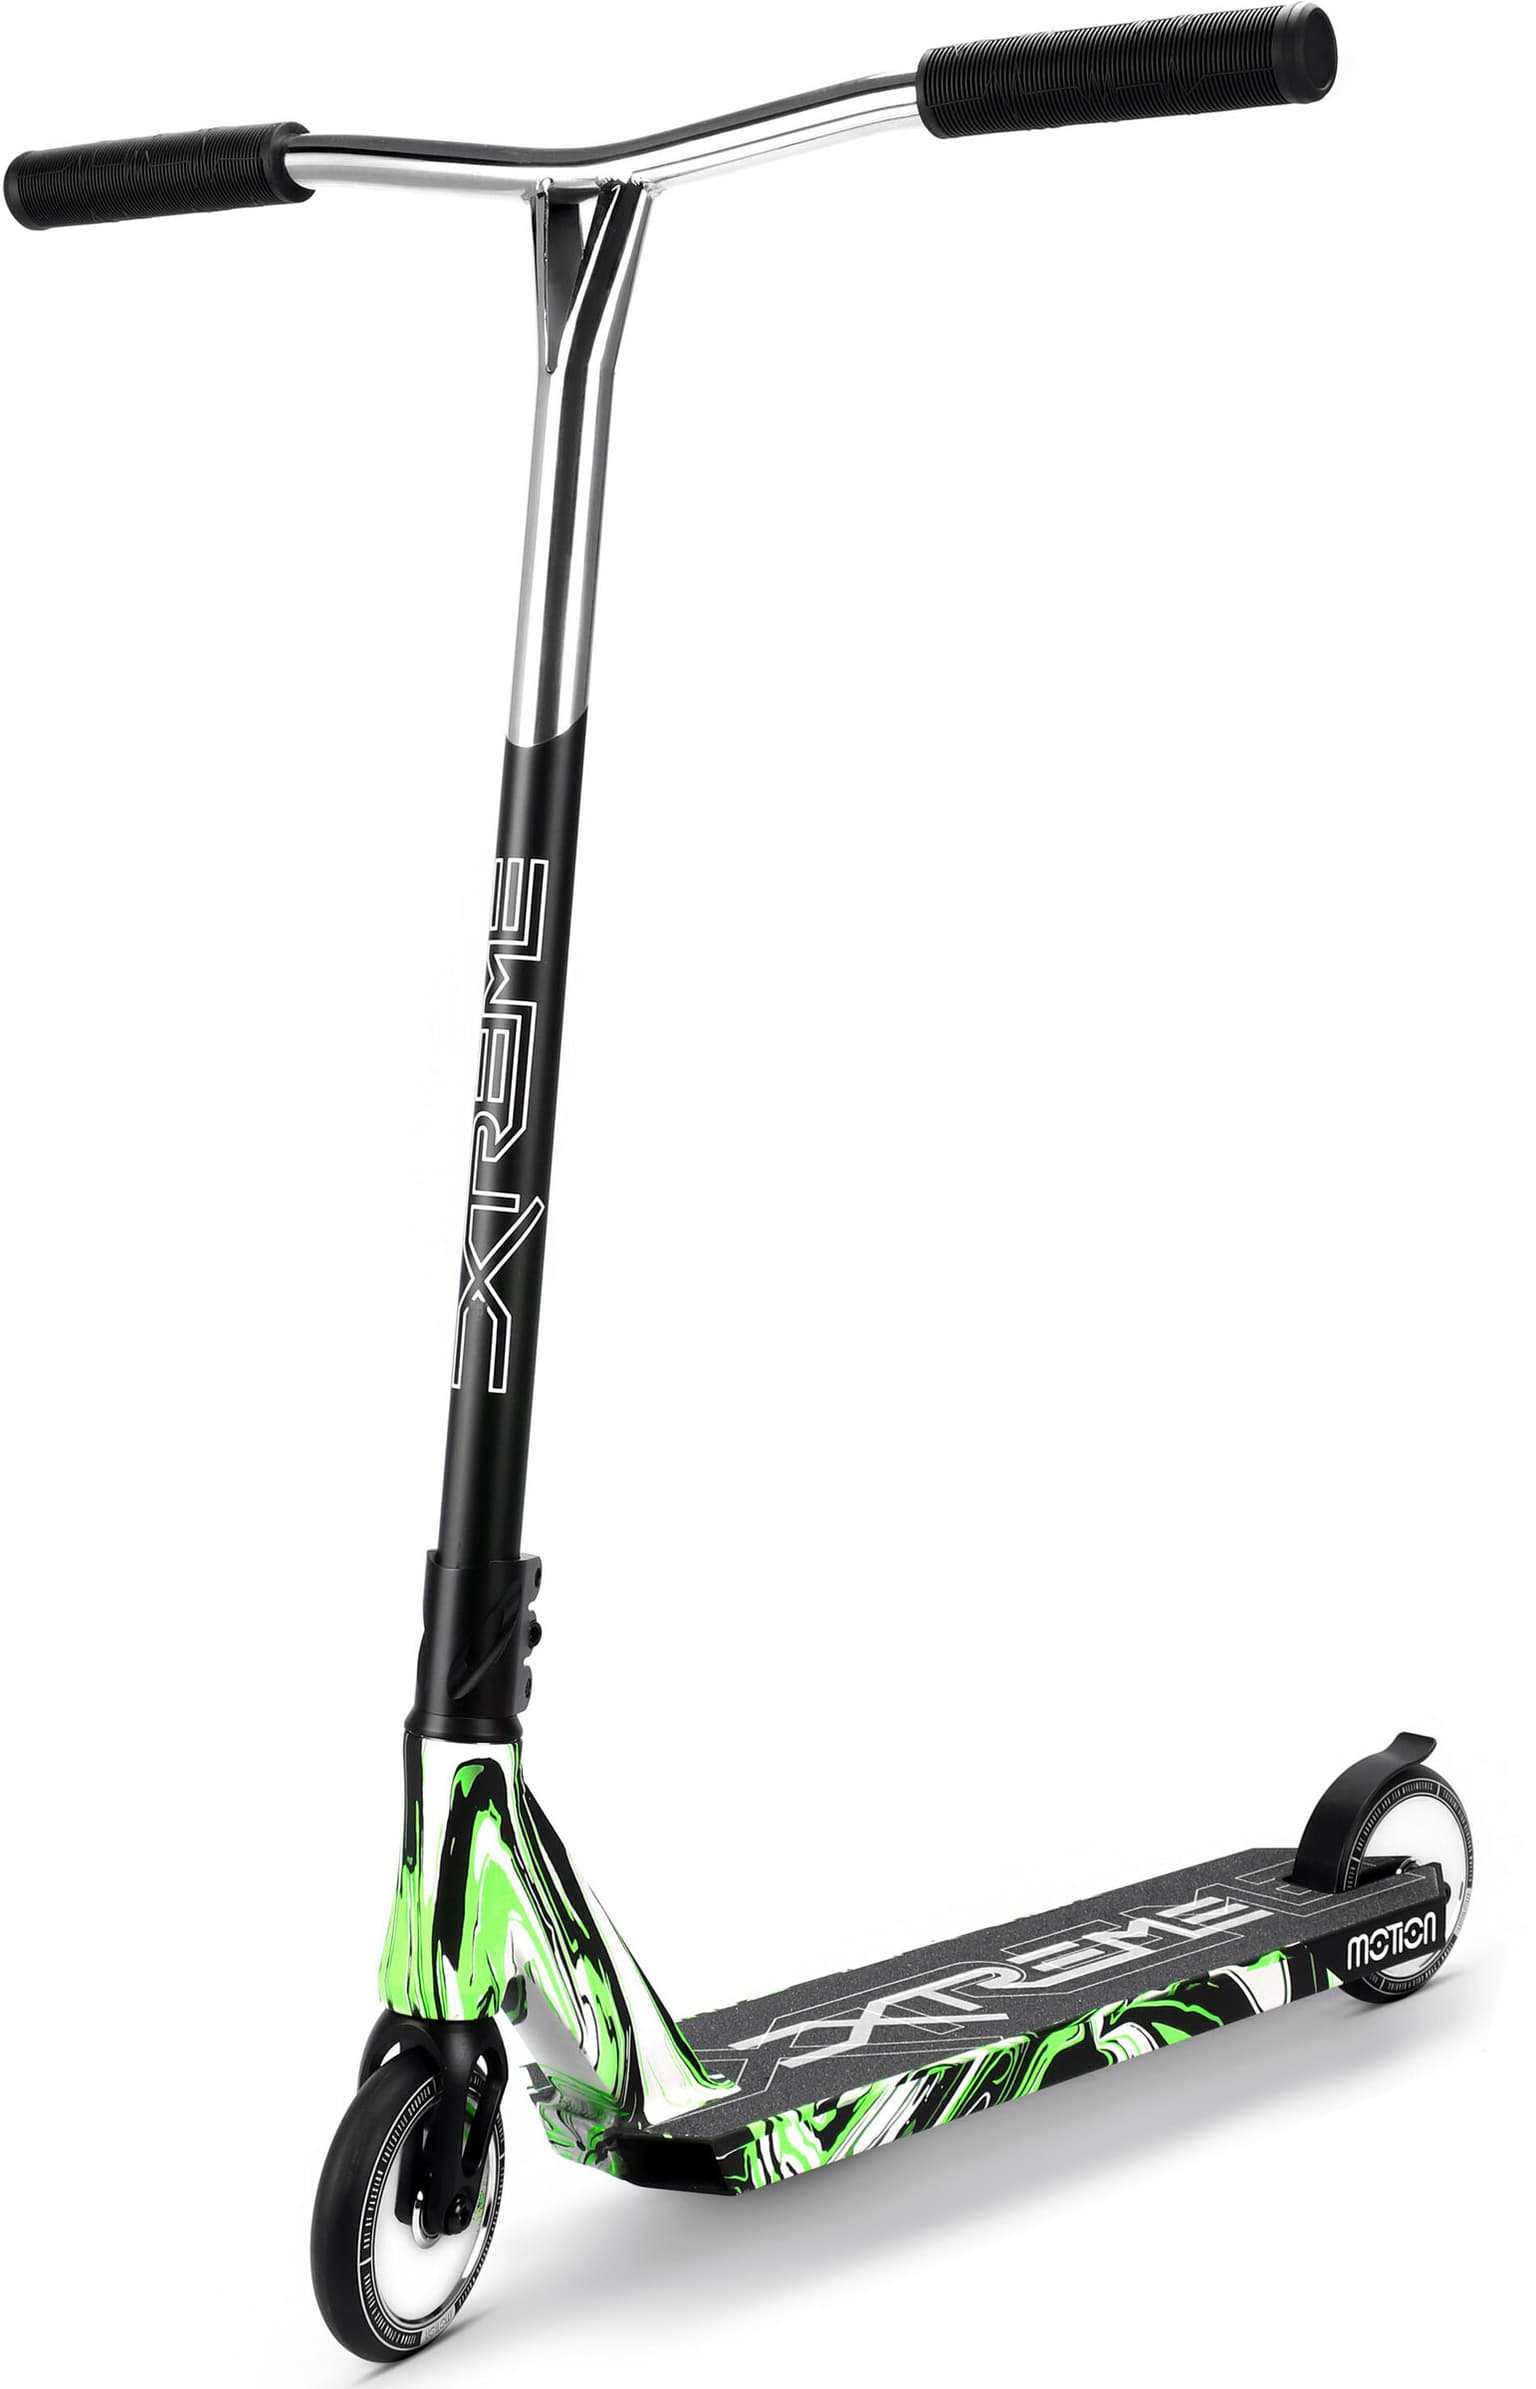 Motion Motion Xtreme Forest Scooter 1